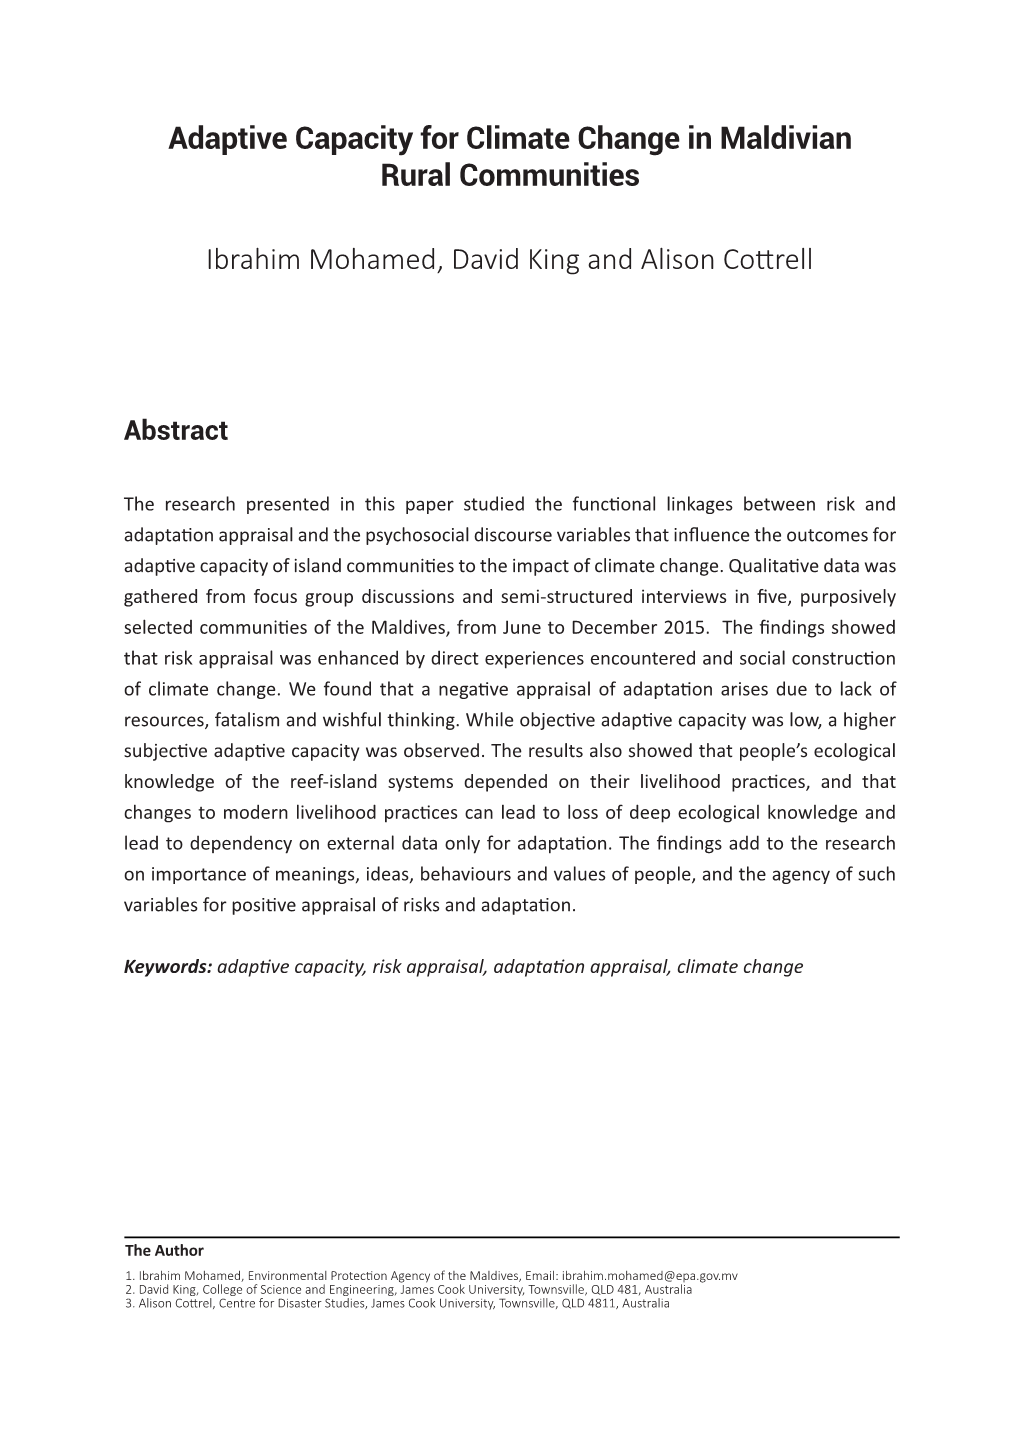 Adaptive Capacity for Climate Change in Maldivian Rural Communities